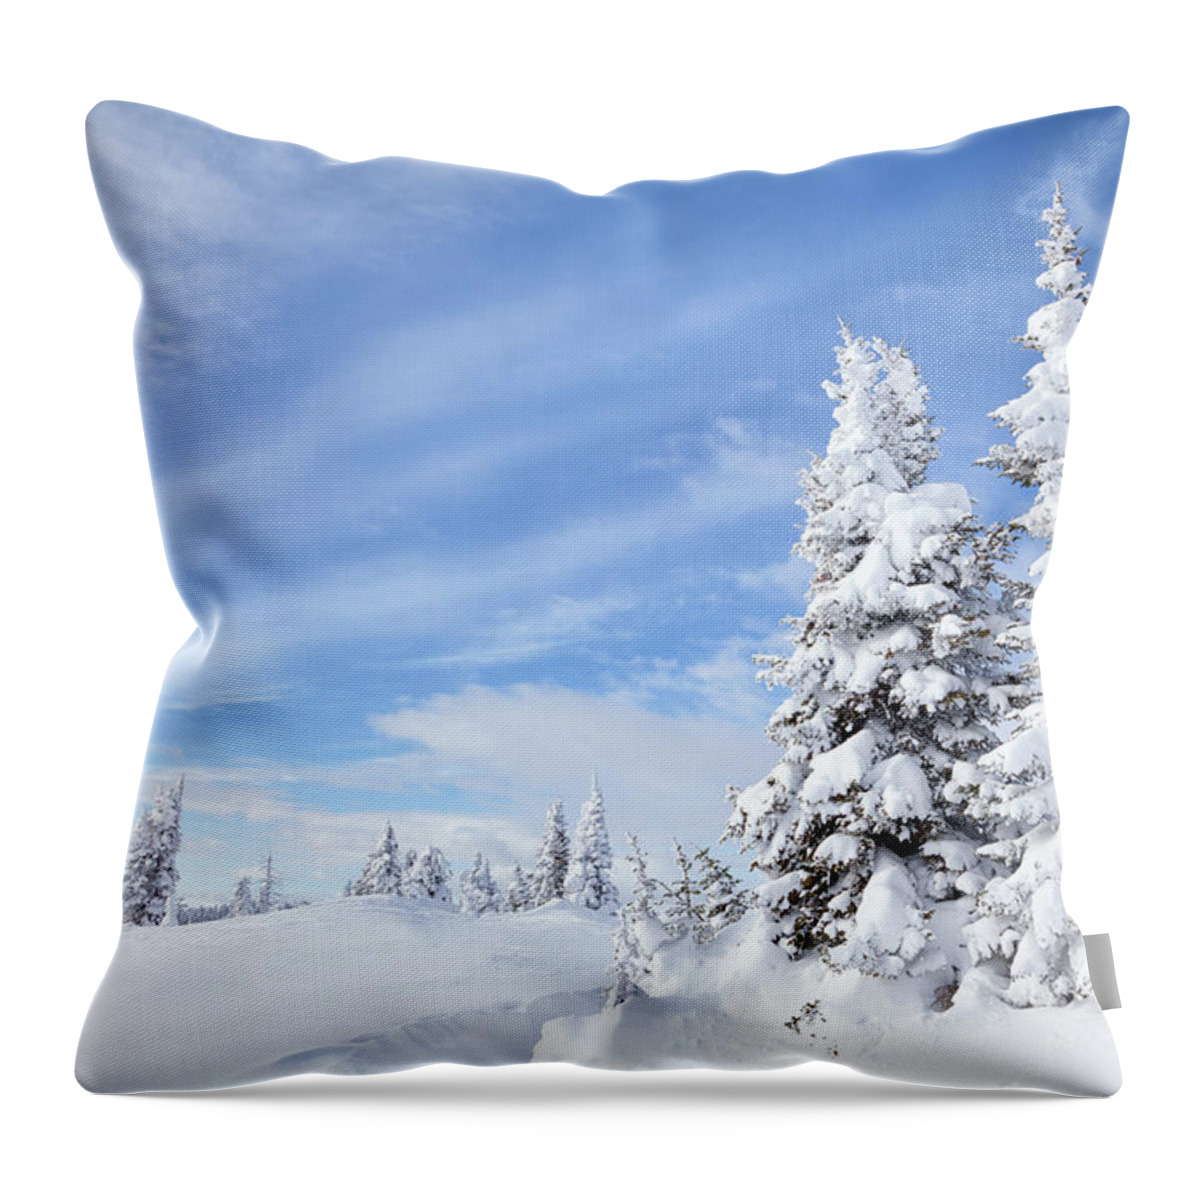 Scenics Throw Pillow featuring the photograph Winter Forest by Kencanning